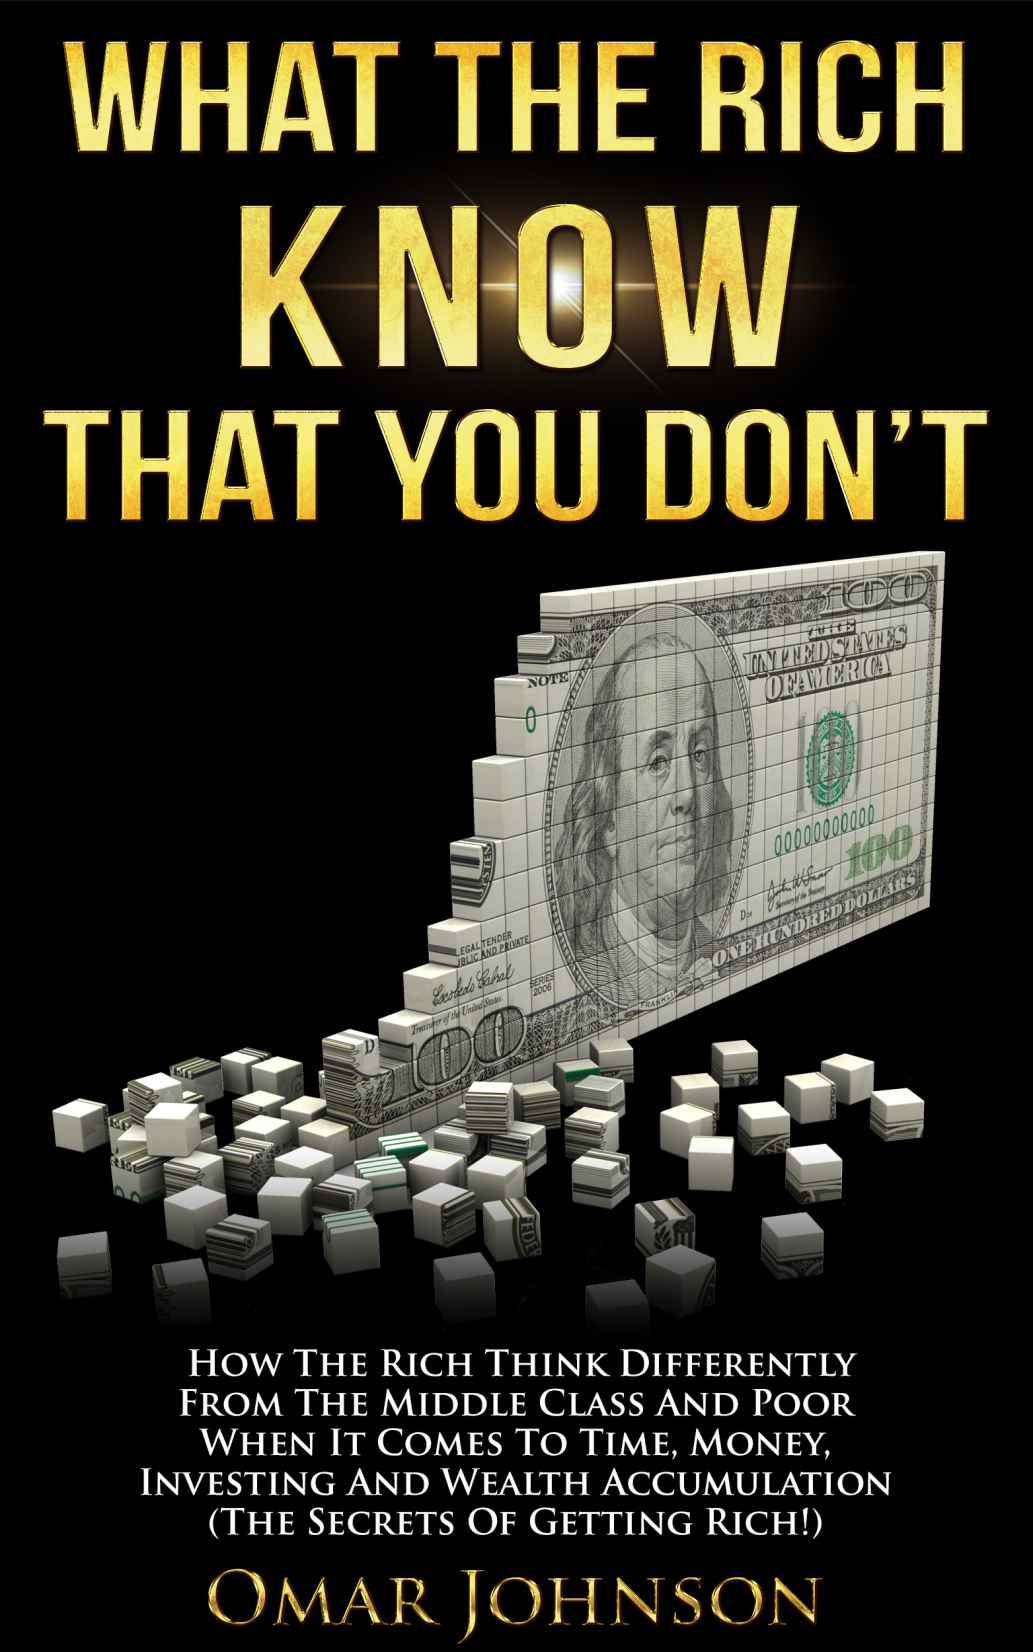 What the Rich Know That You Don't: How the Rich Think Differently From the Middle Class and Poor When It Comes to Time, Money, Investing and Wealth Accumulation